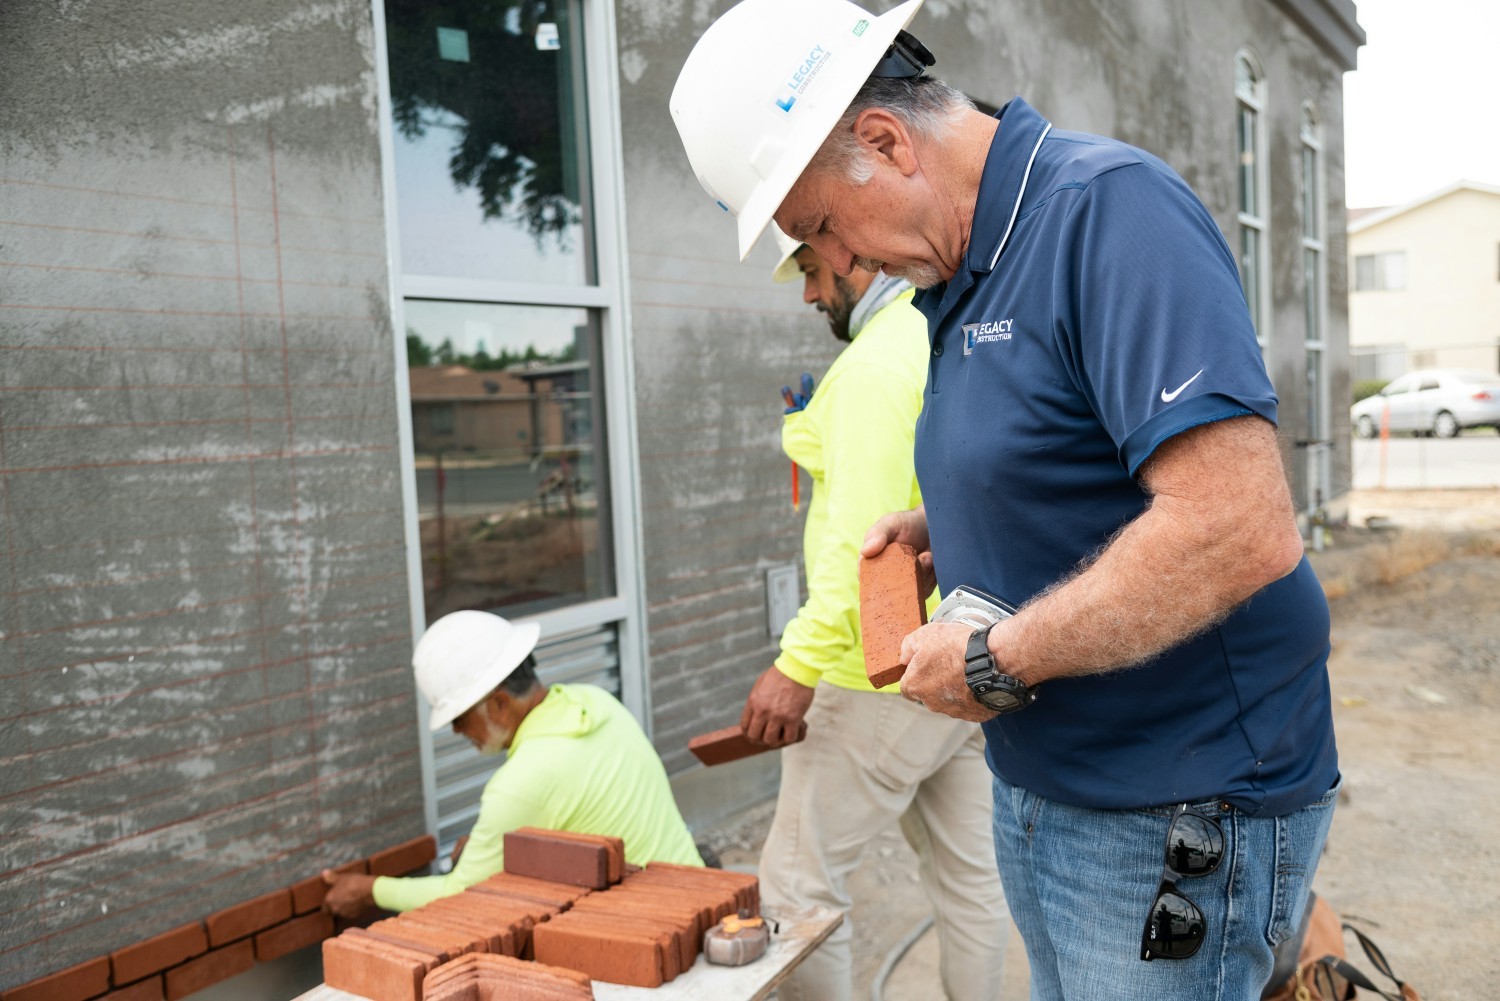 Ara checking the bricks to be laid on the exterior of a health center in progress.